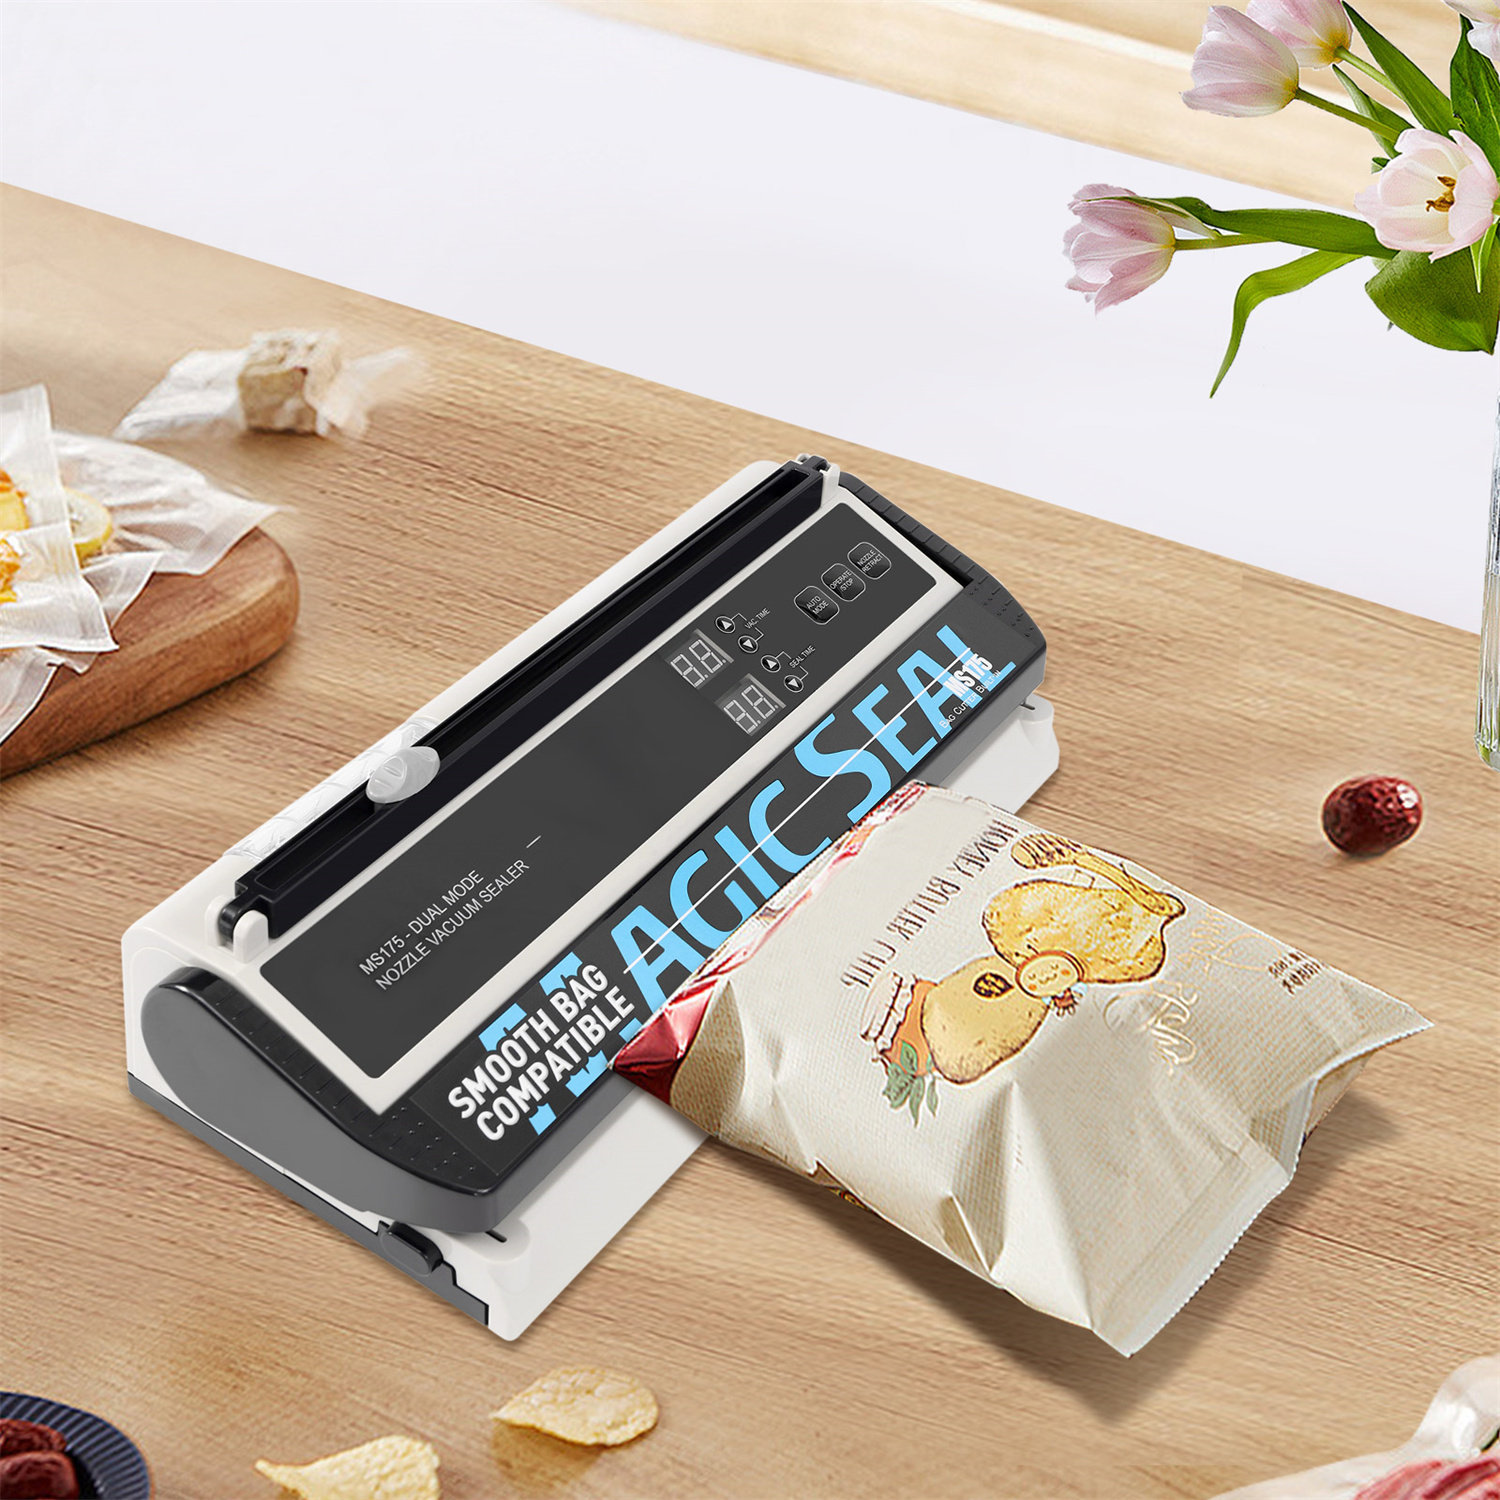 Vacuum Sealer Uses - Things You Can Seal With A Food Saver Machine